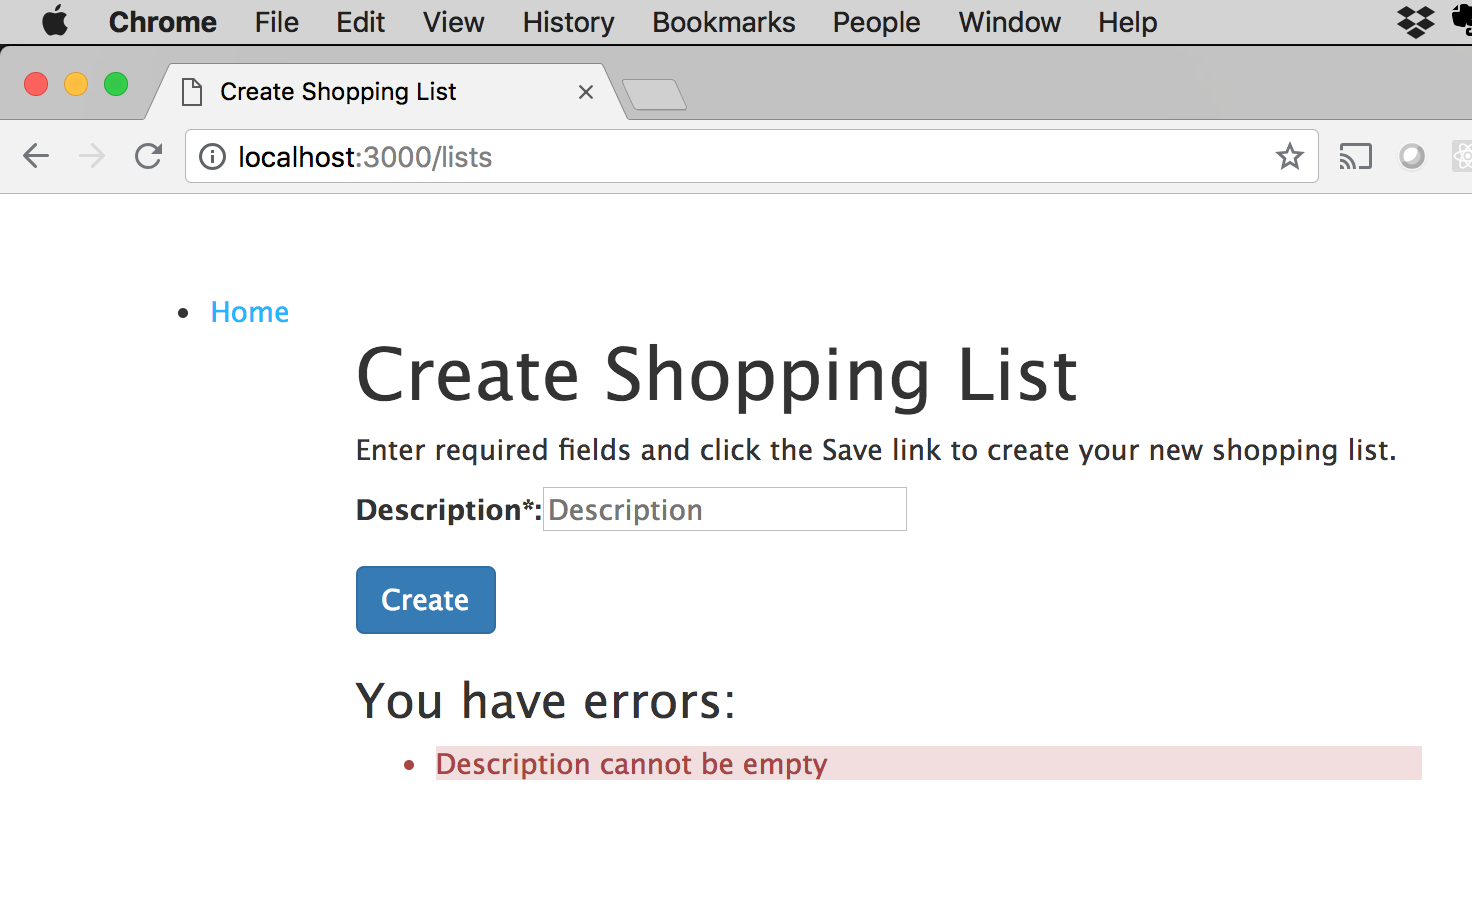 Create Shopping List page with validation error